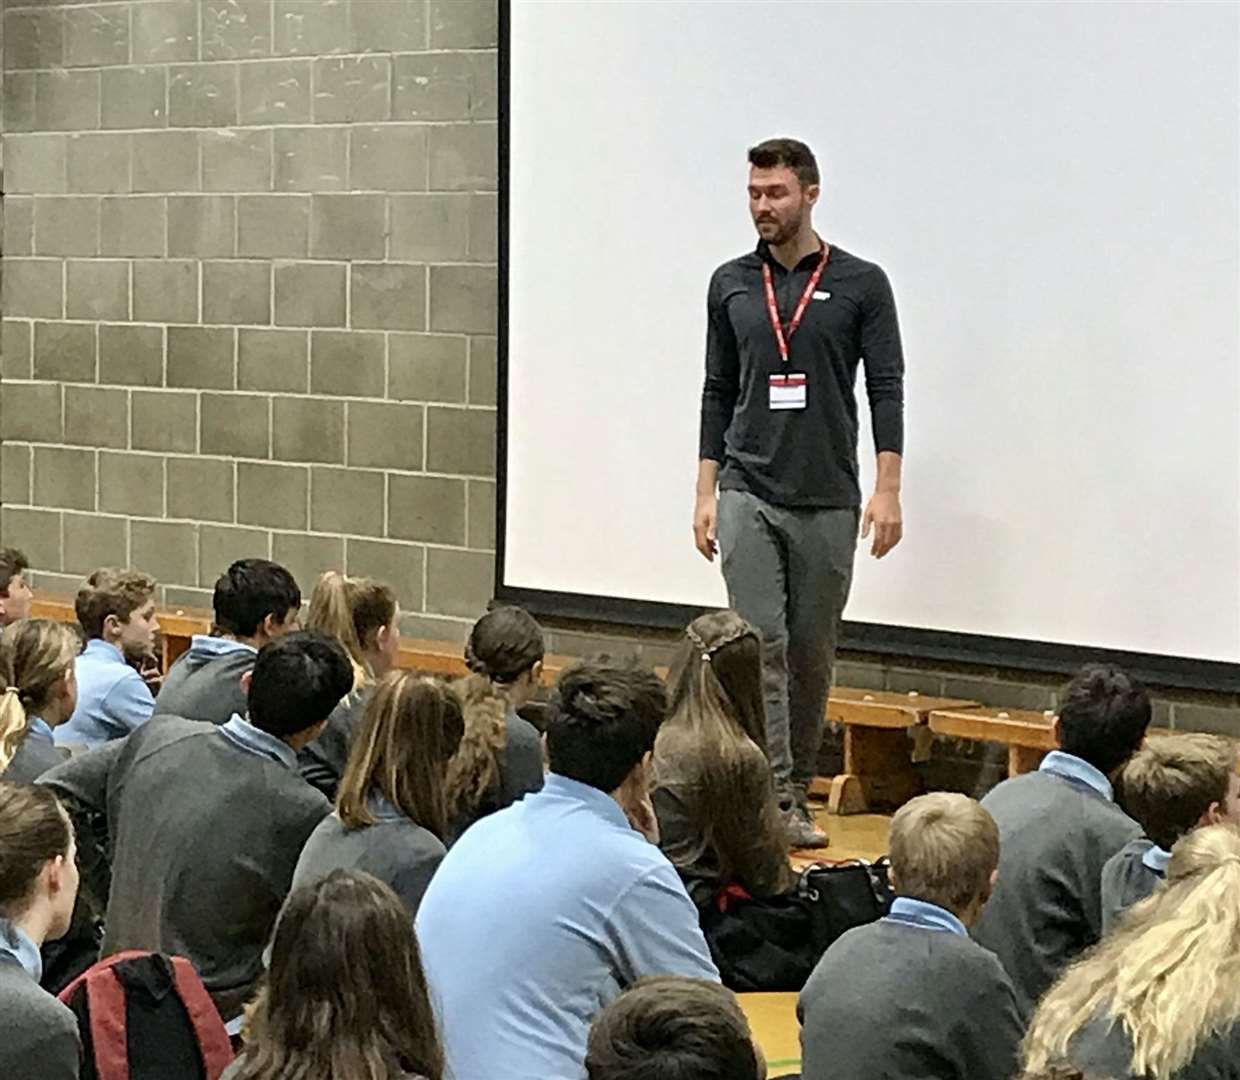 Ricky at a school educating students on healthy eating and fitness. (8141117)